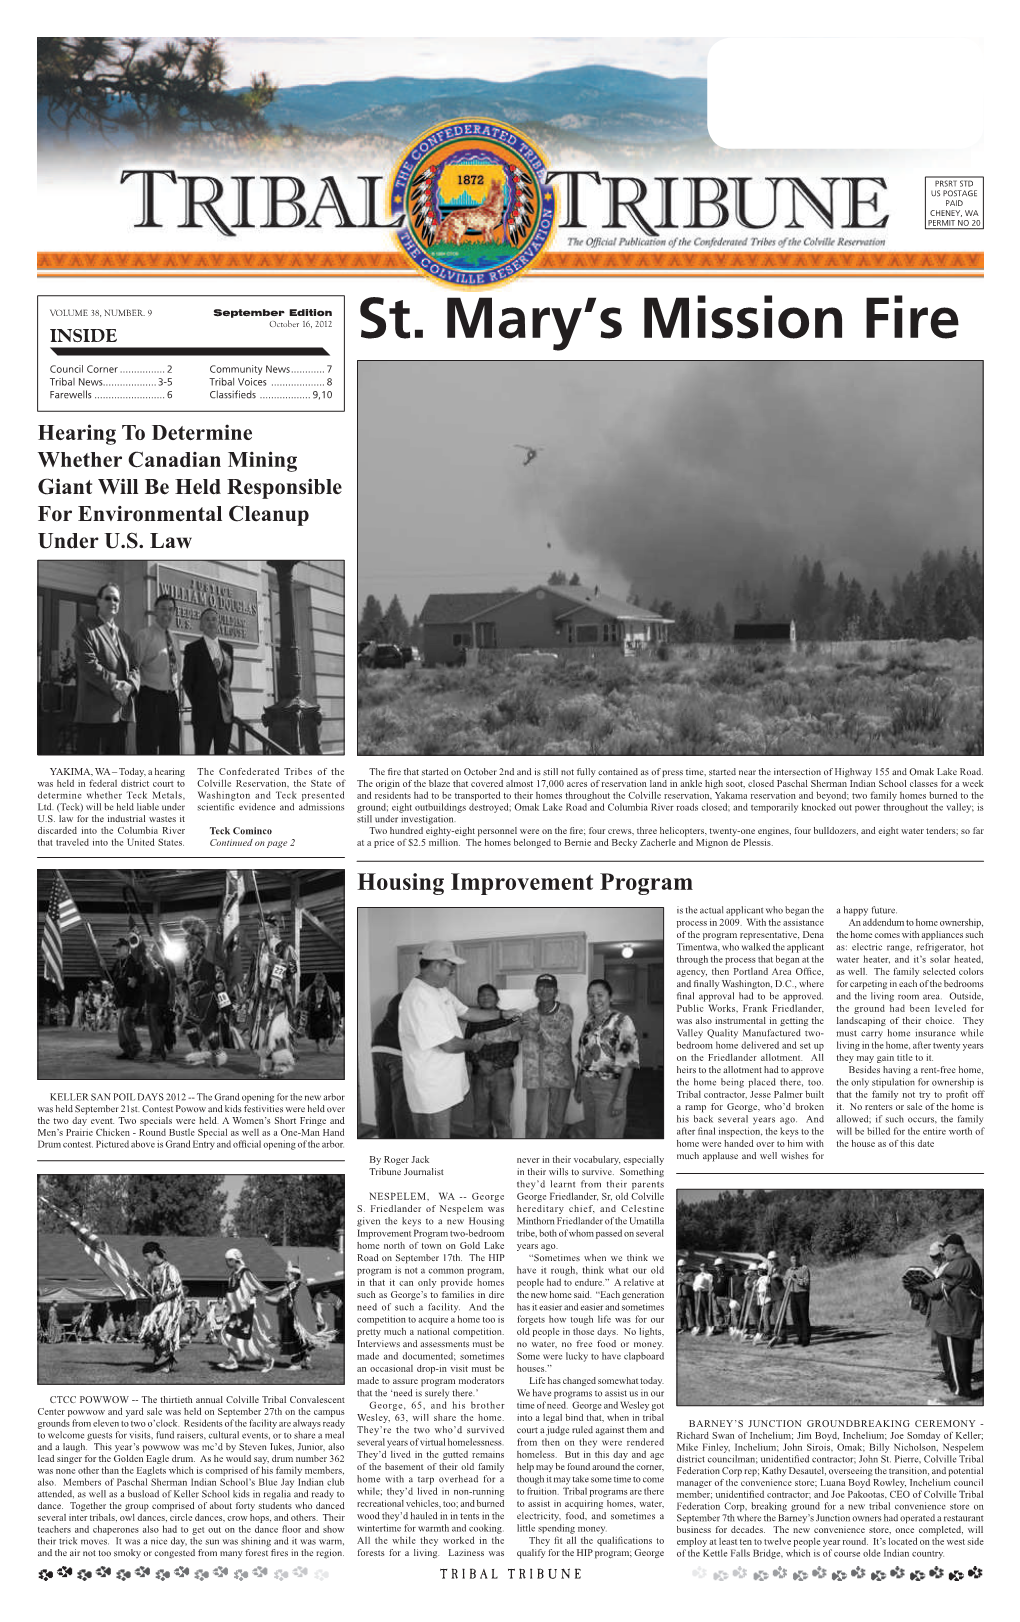 St. Mary's Mission Fire